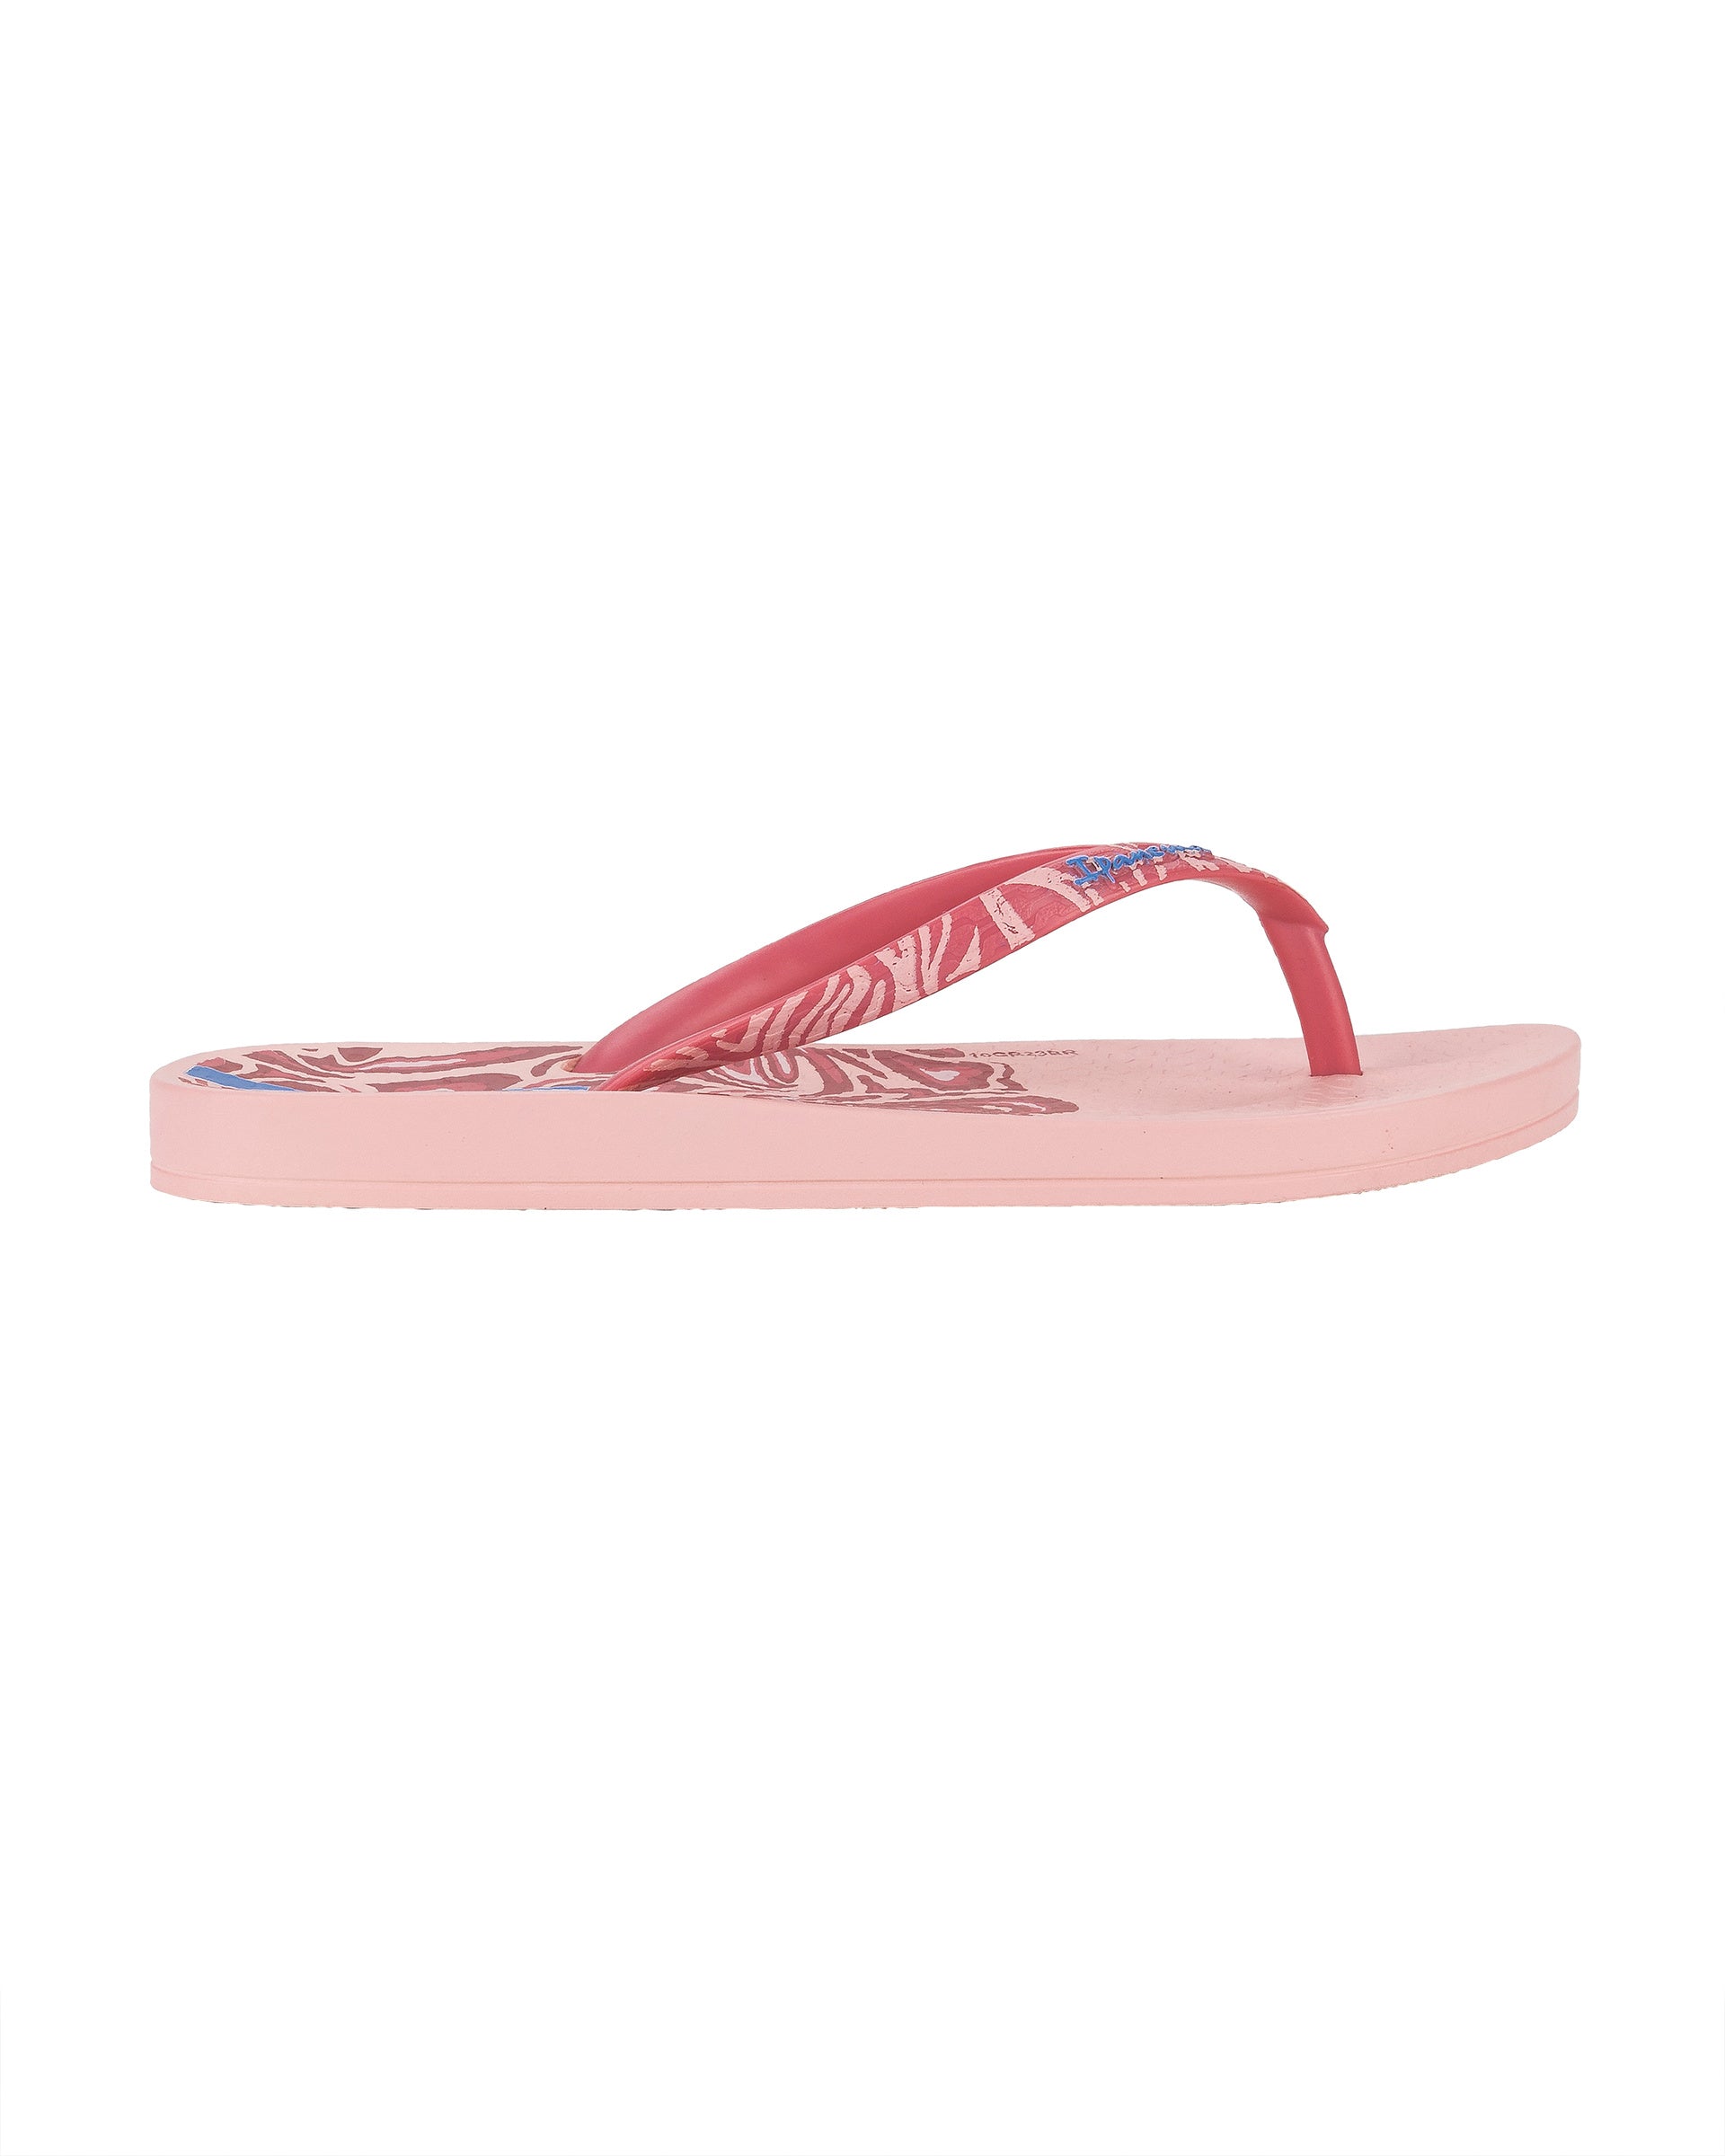 Outer side view of a light pink Ipanema Nostalgic Hearts kid's flip flop with heart outlines on insole and strap.